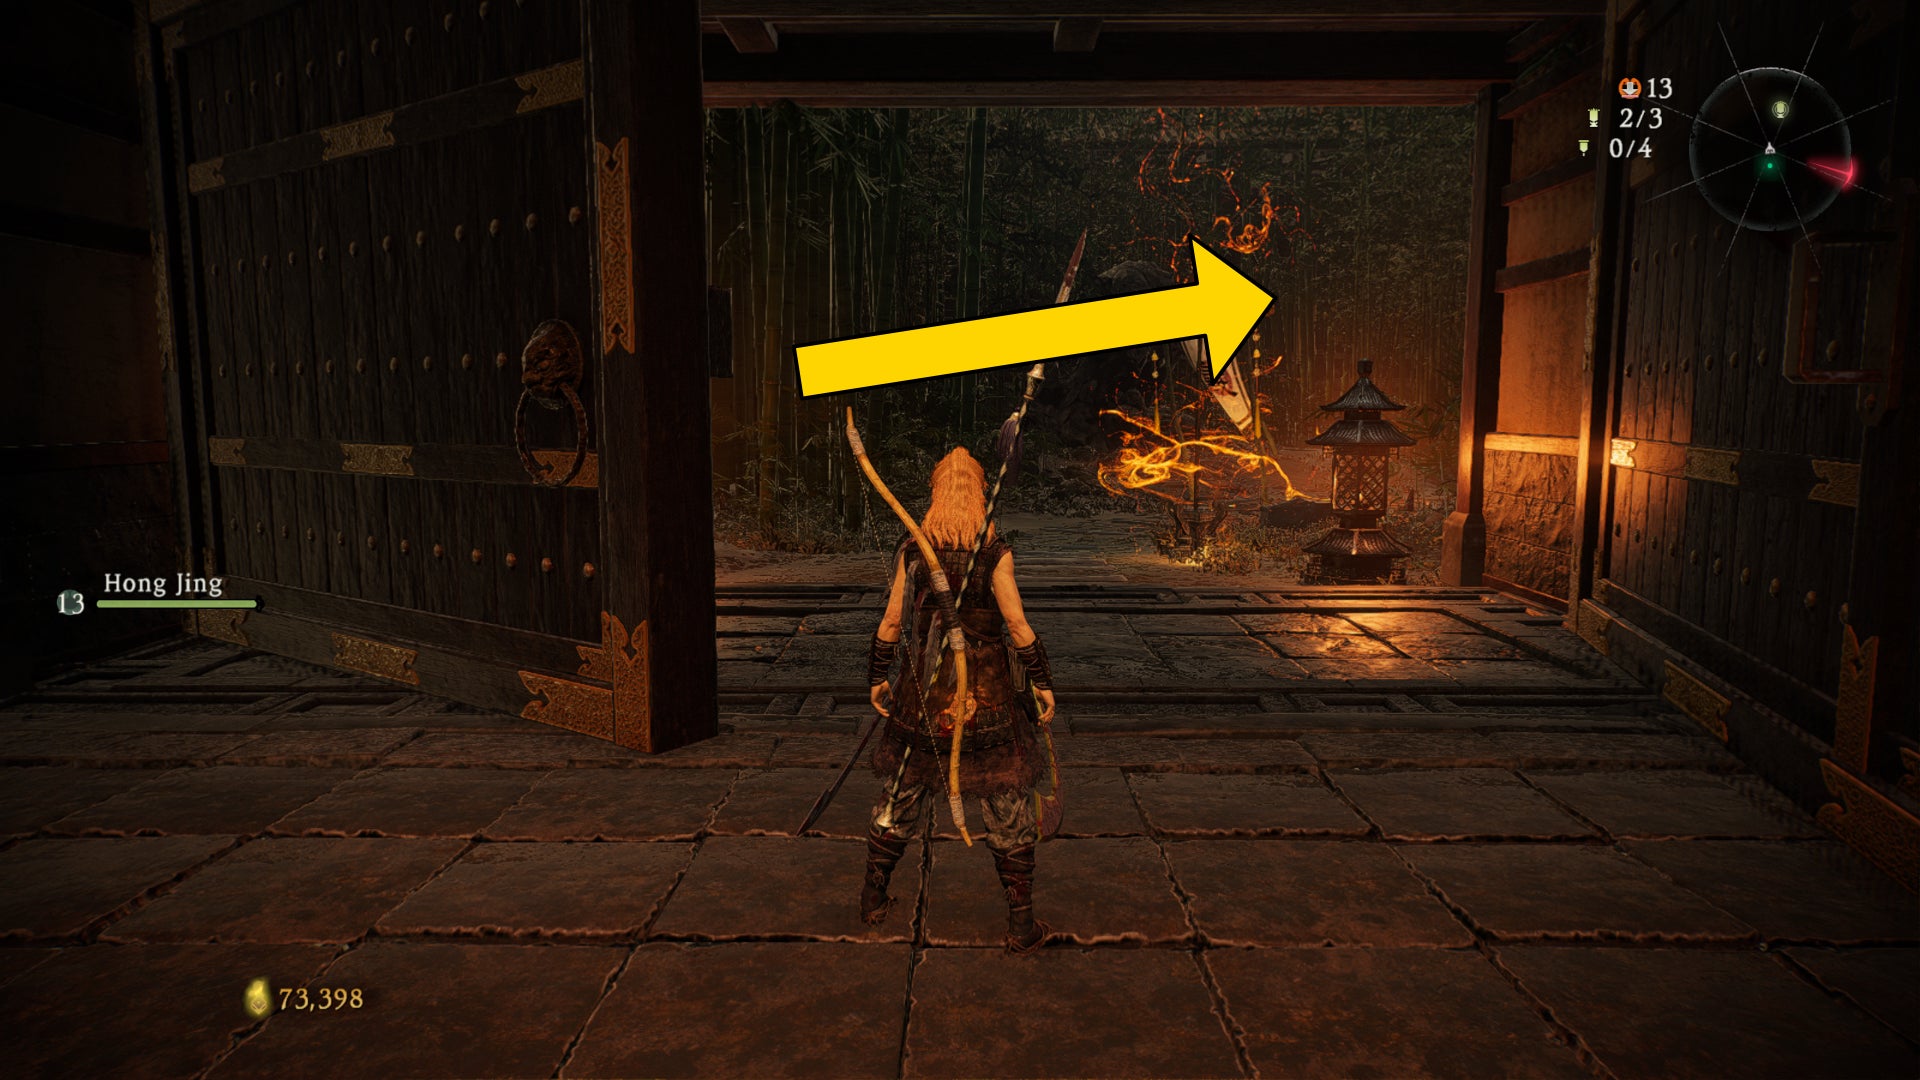 The player in Wo Long stands in front of a gate, behind which is a Battle Flag. An arrow indicates the location of the nearest Shitieshou.